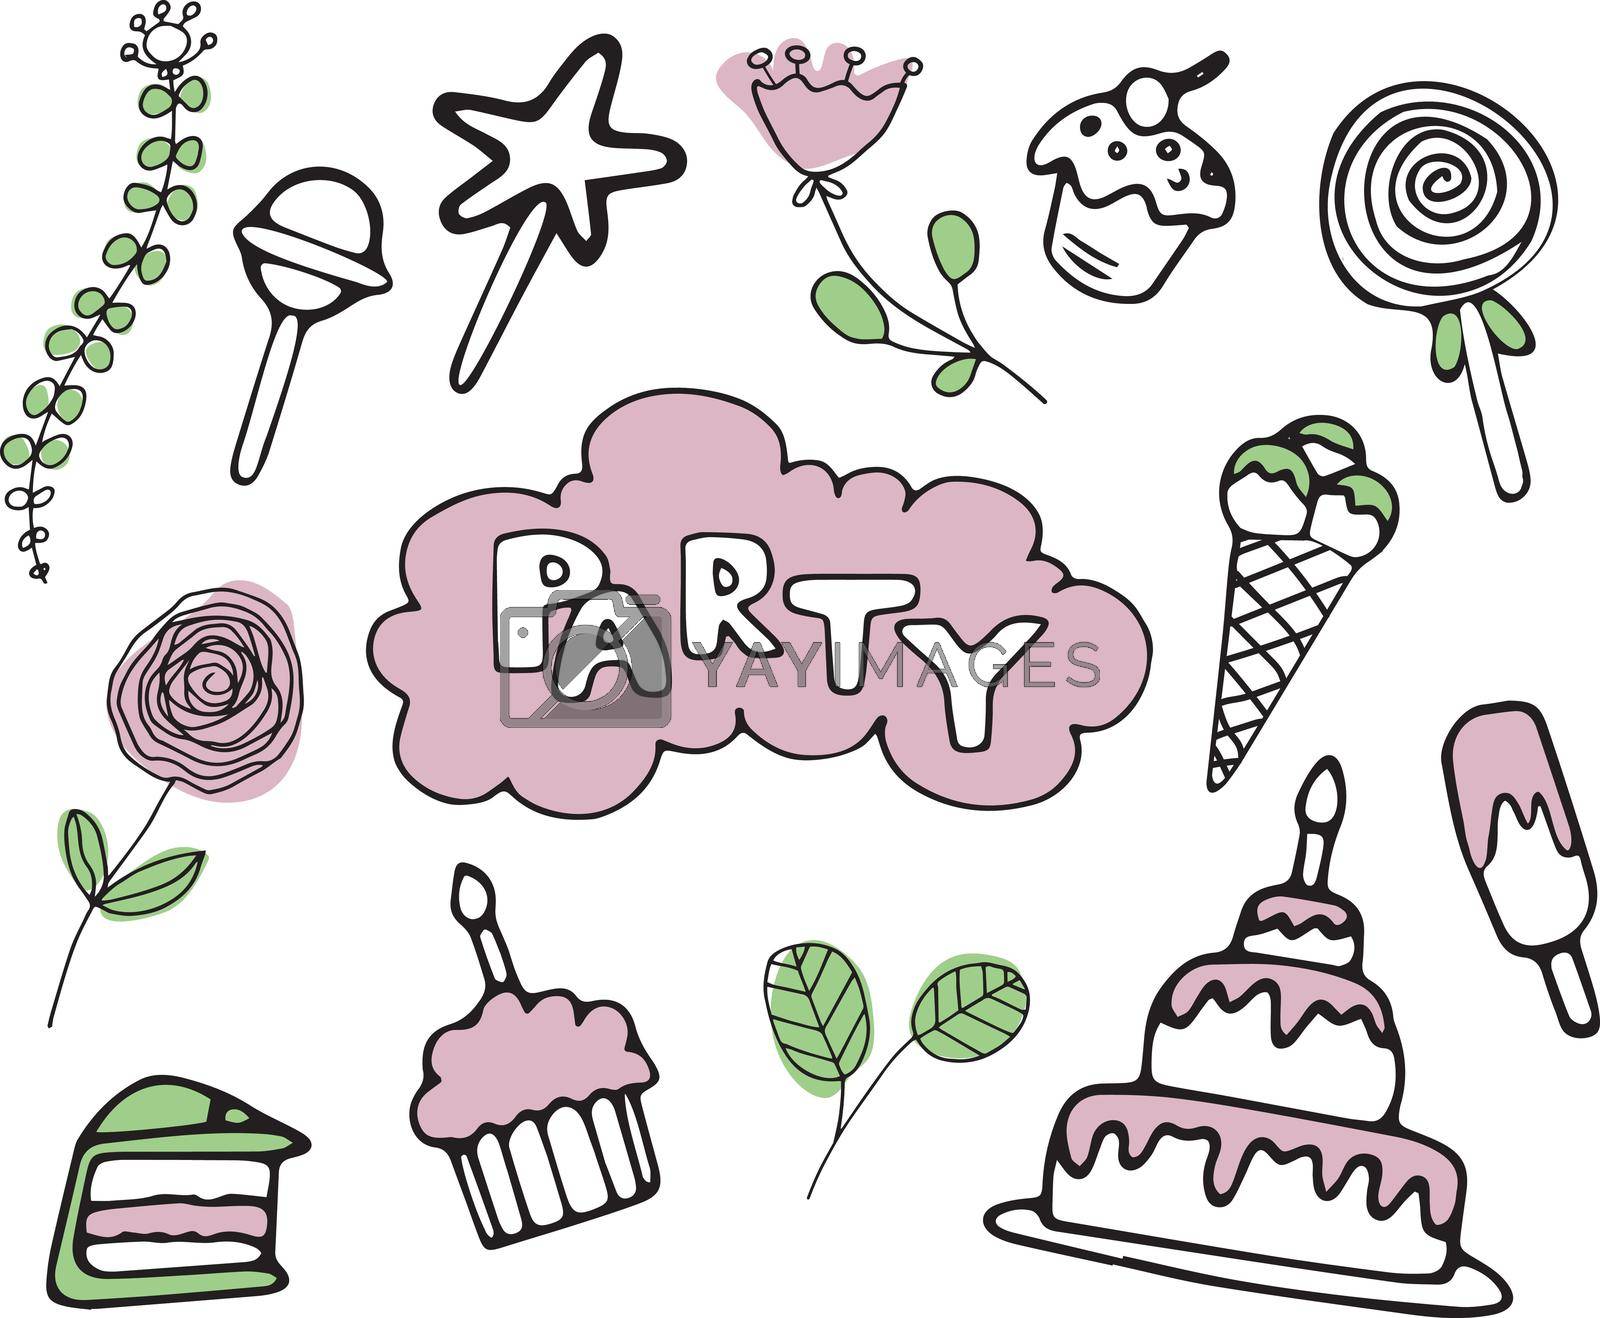 Set of colorful party icons elements on white background. Cute celebration collection